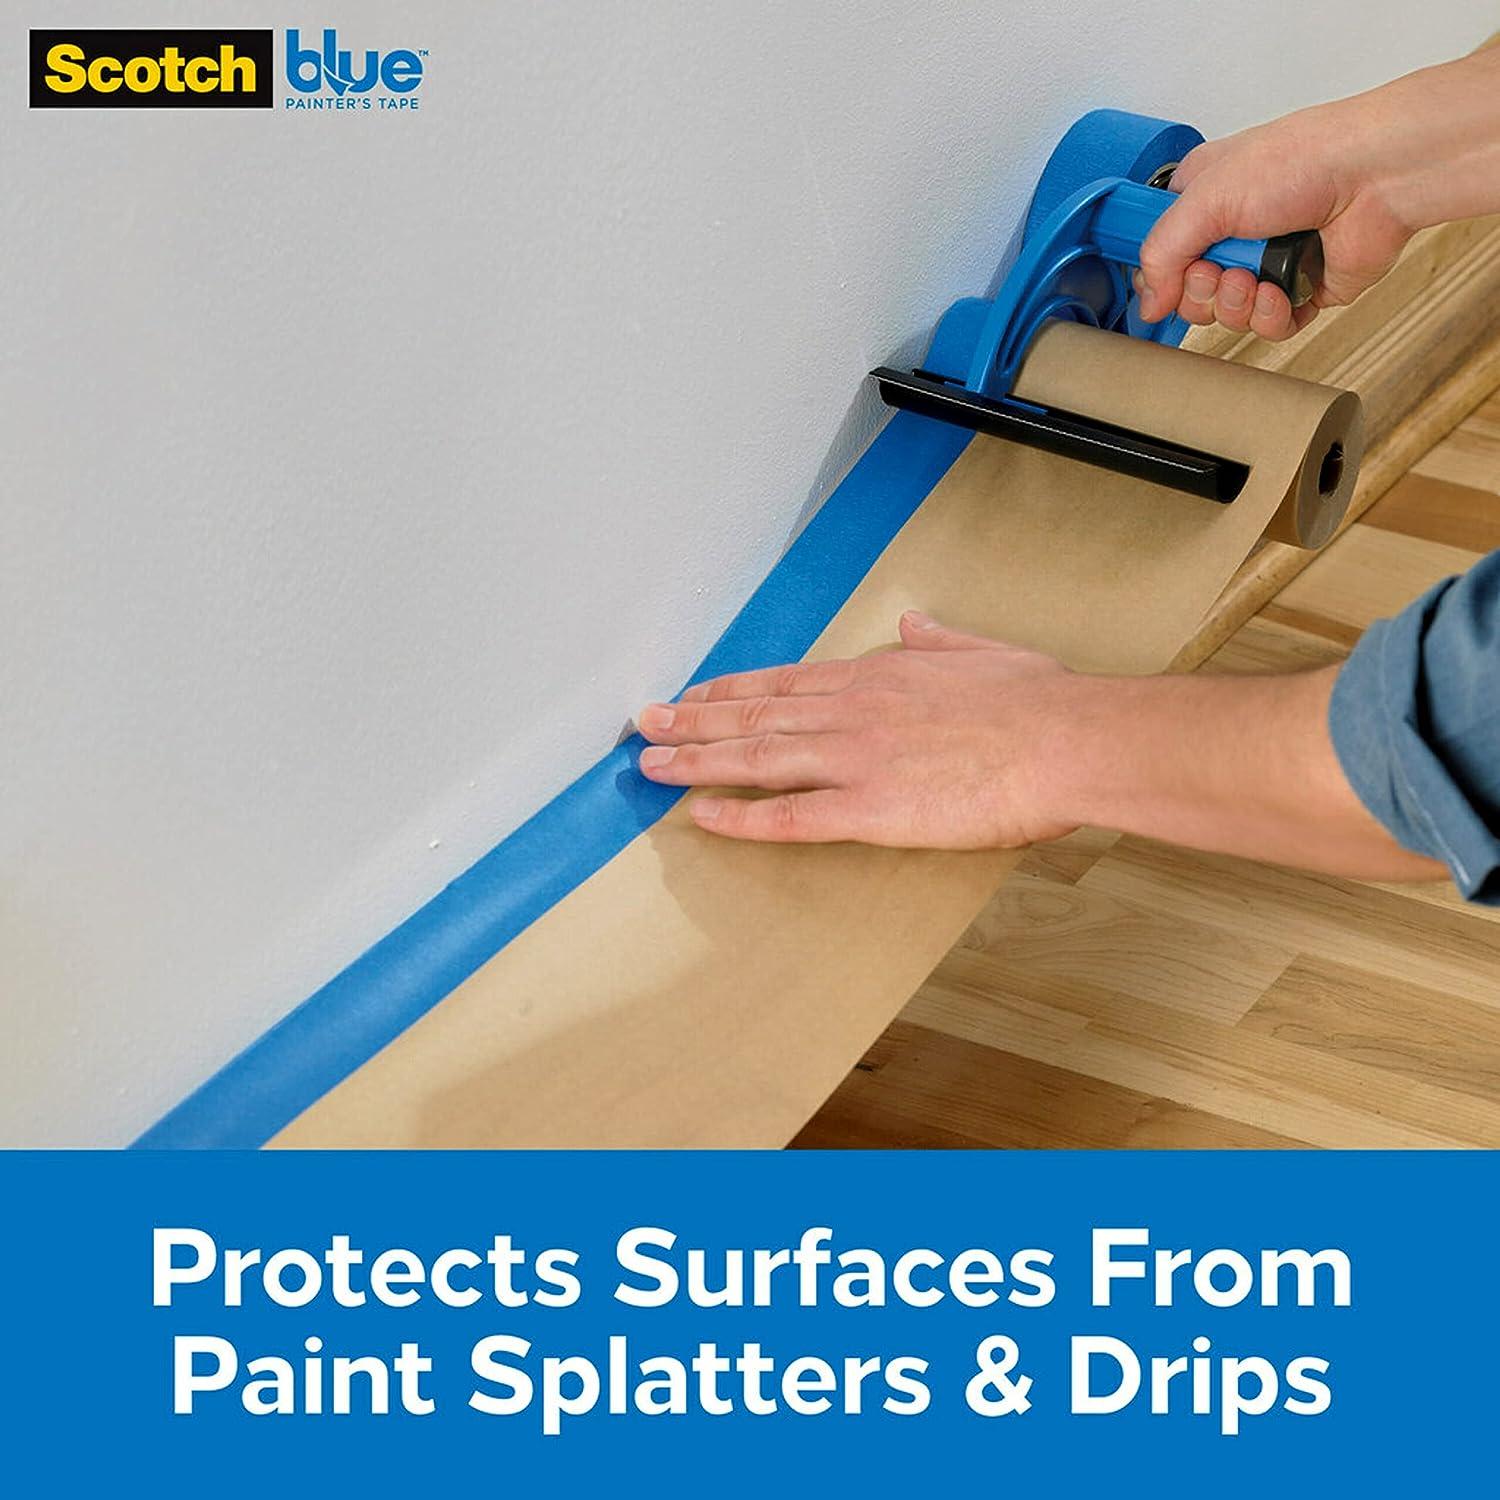 ScotchBlue Painter's Tape and Paper Dispenser Applies Masking Paper with  Painter s Tape to Protect and Cover Surfaces Tape Dispenser Includes  Plastic Blade Fits 12 Inch Masking Paper